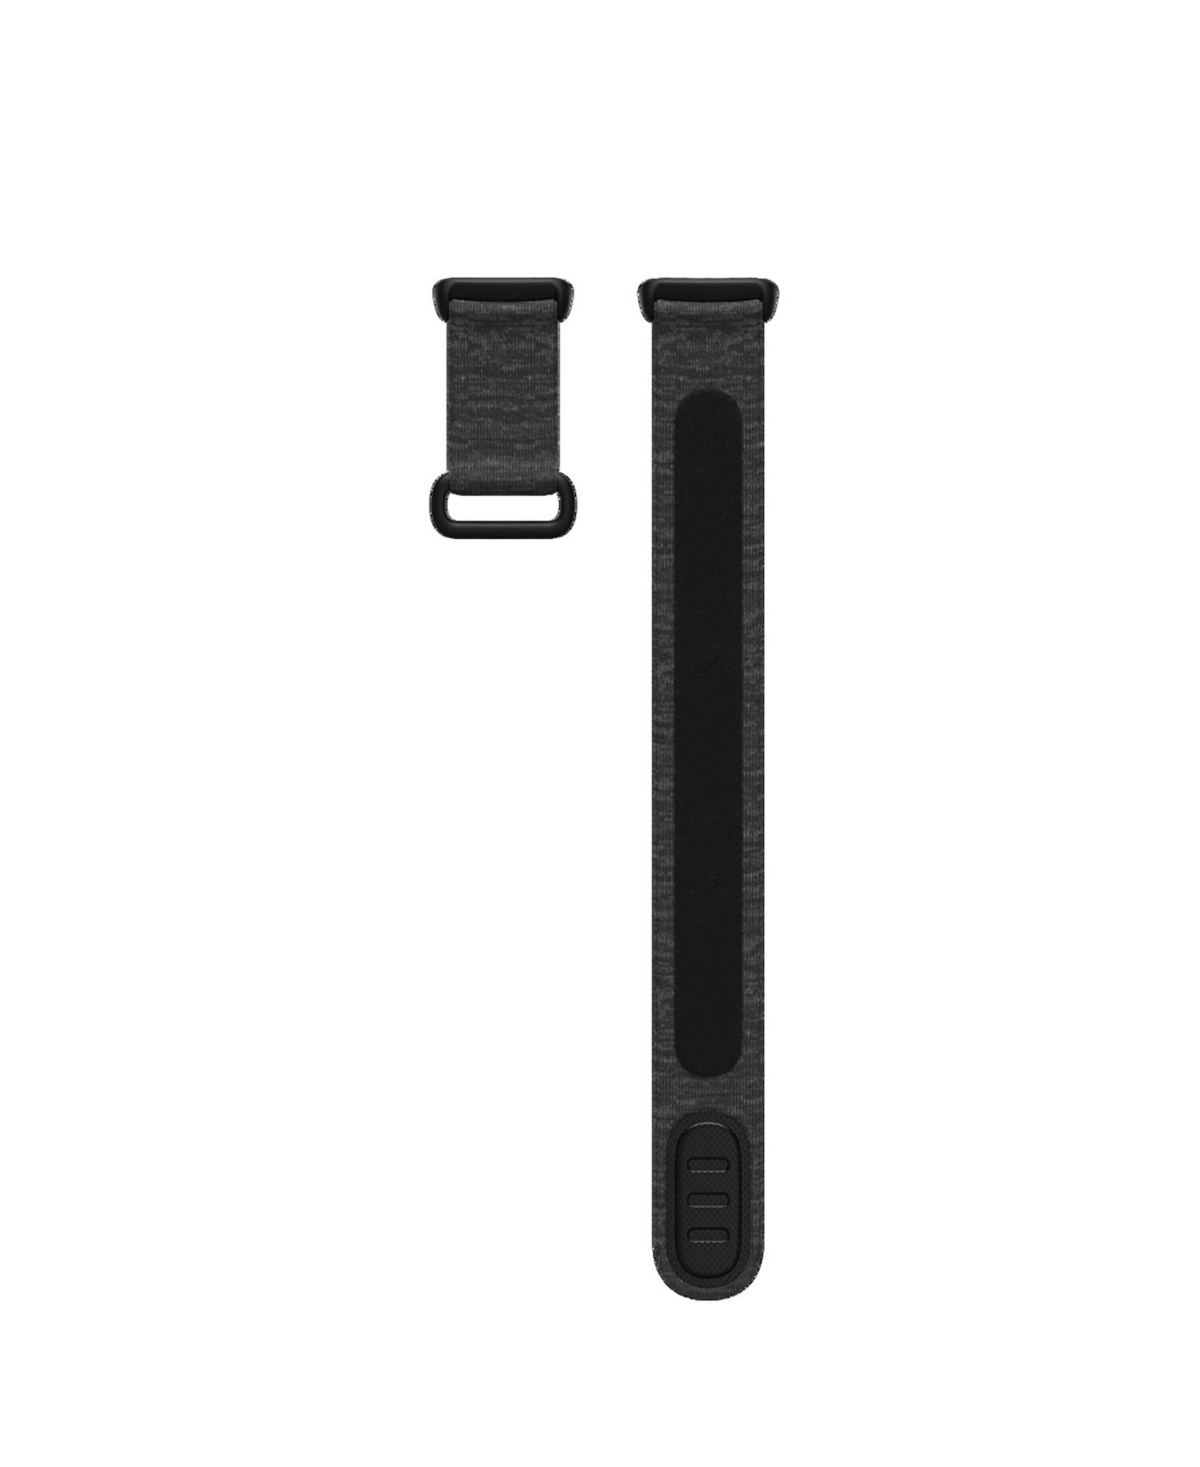 Charge 5 Charcoal Nylon and Polyester Hook and Loop Band, Large - Charcoal